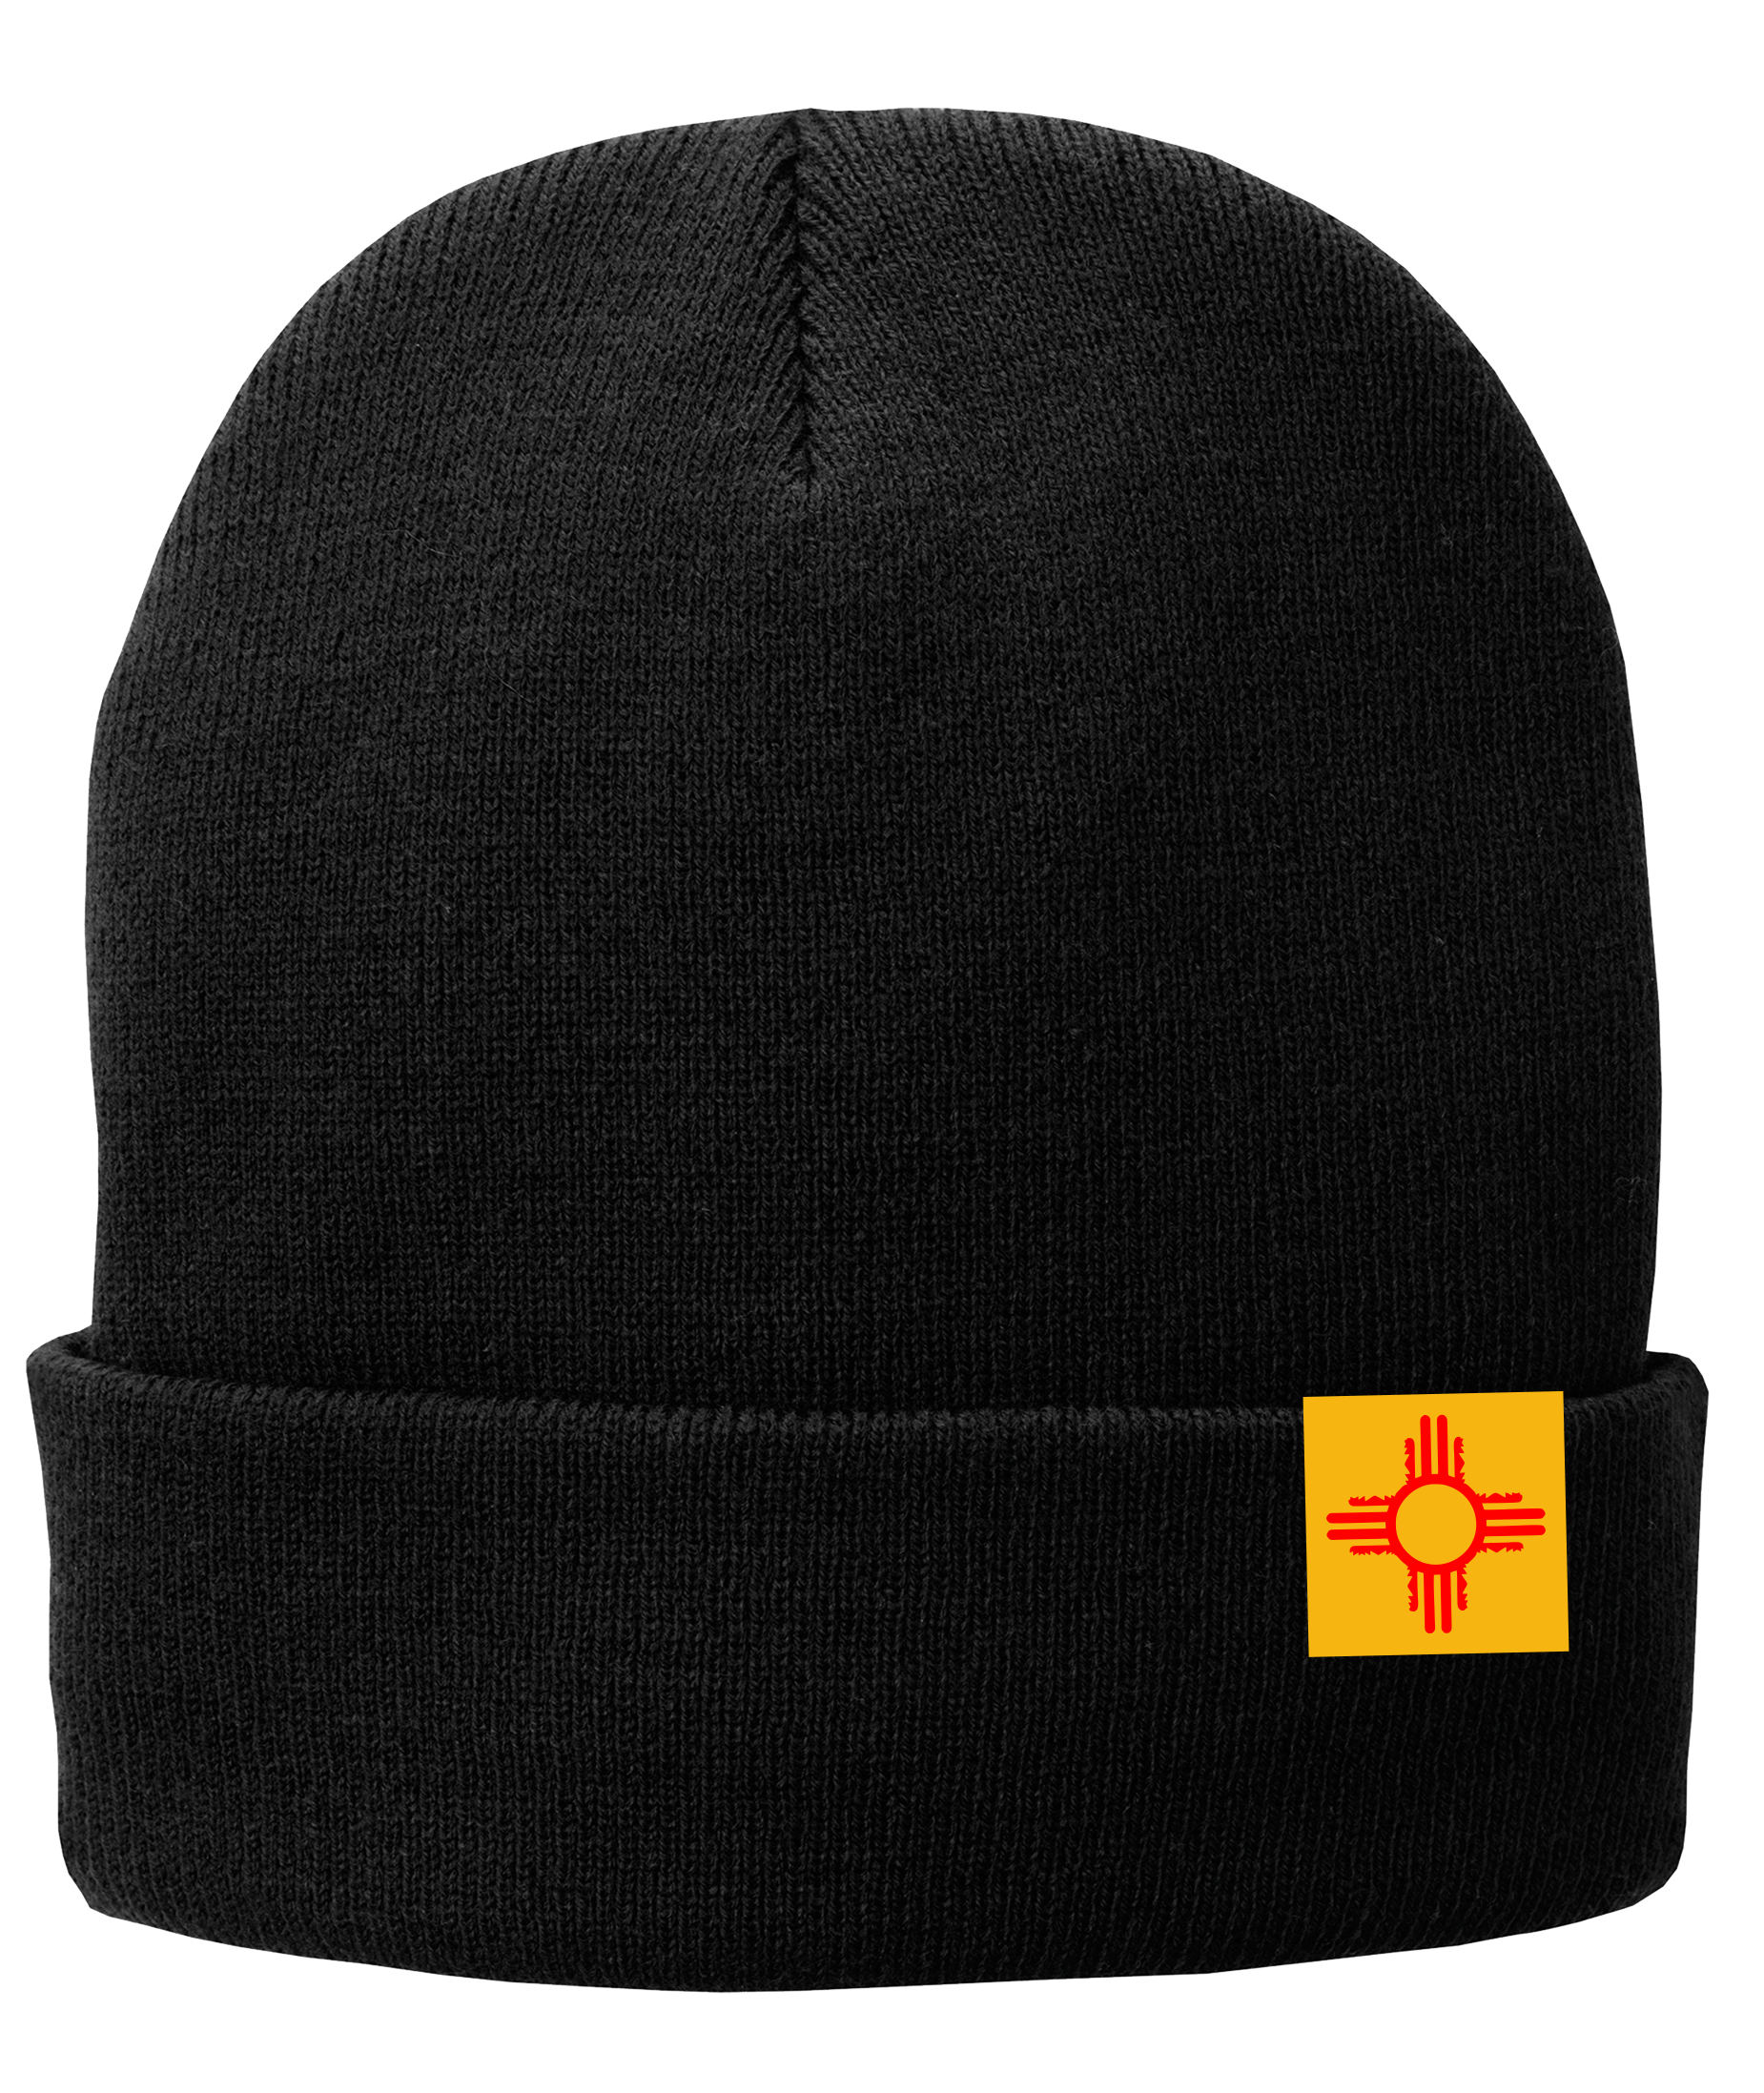 Lined Zia Beanie